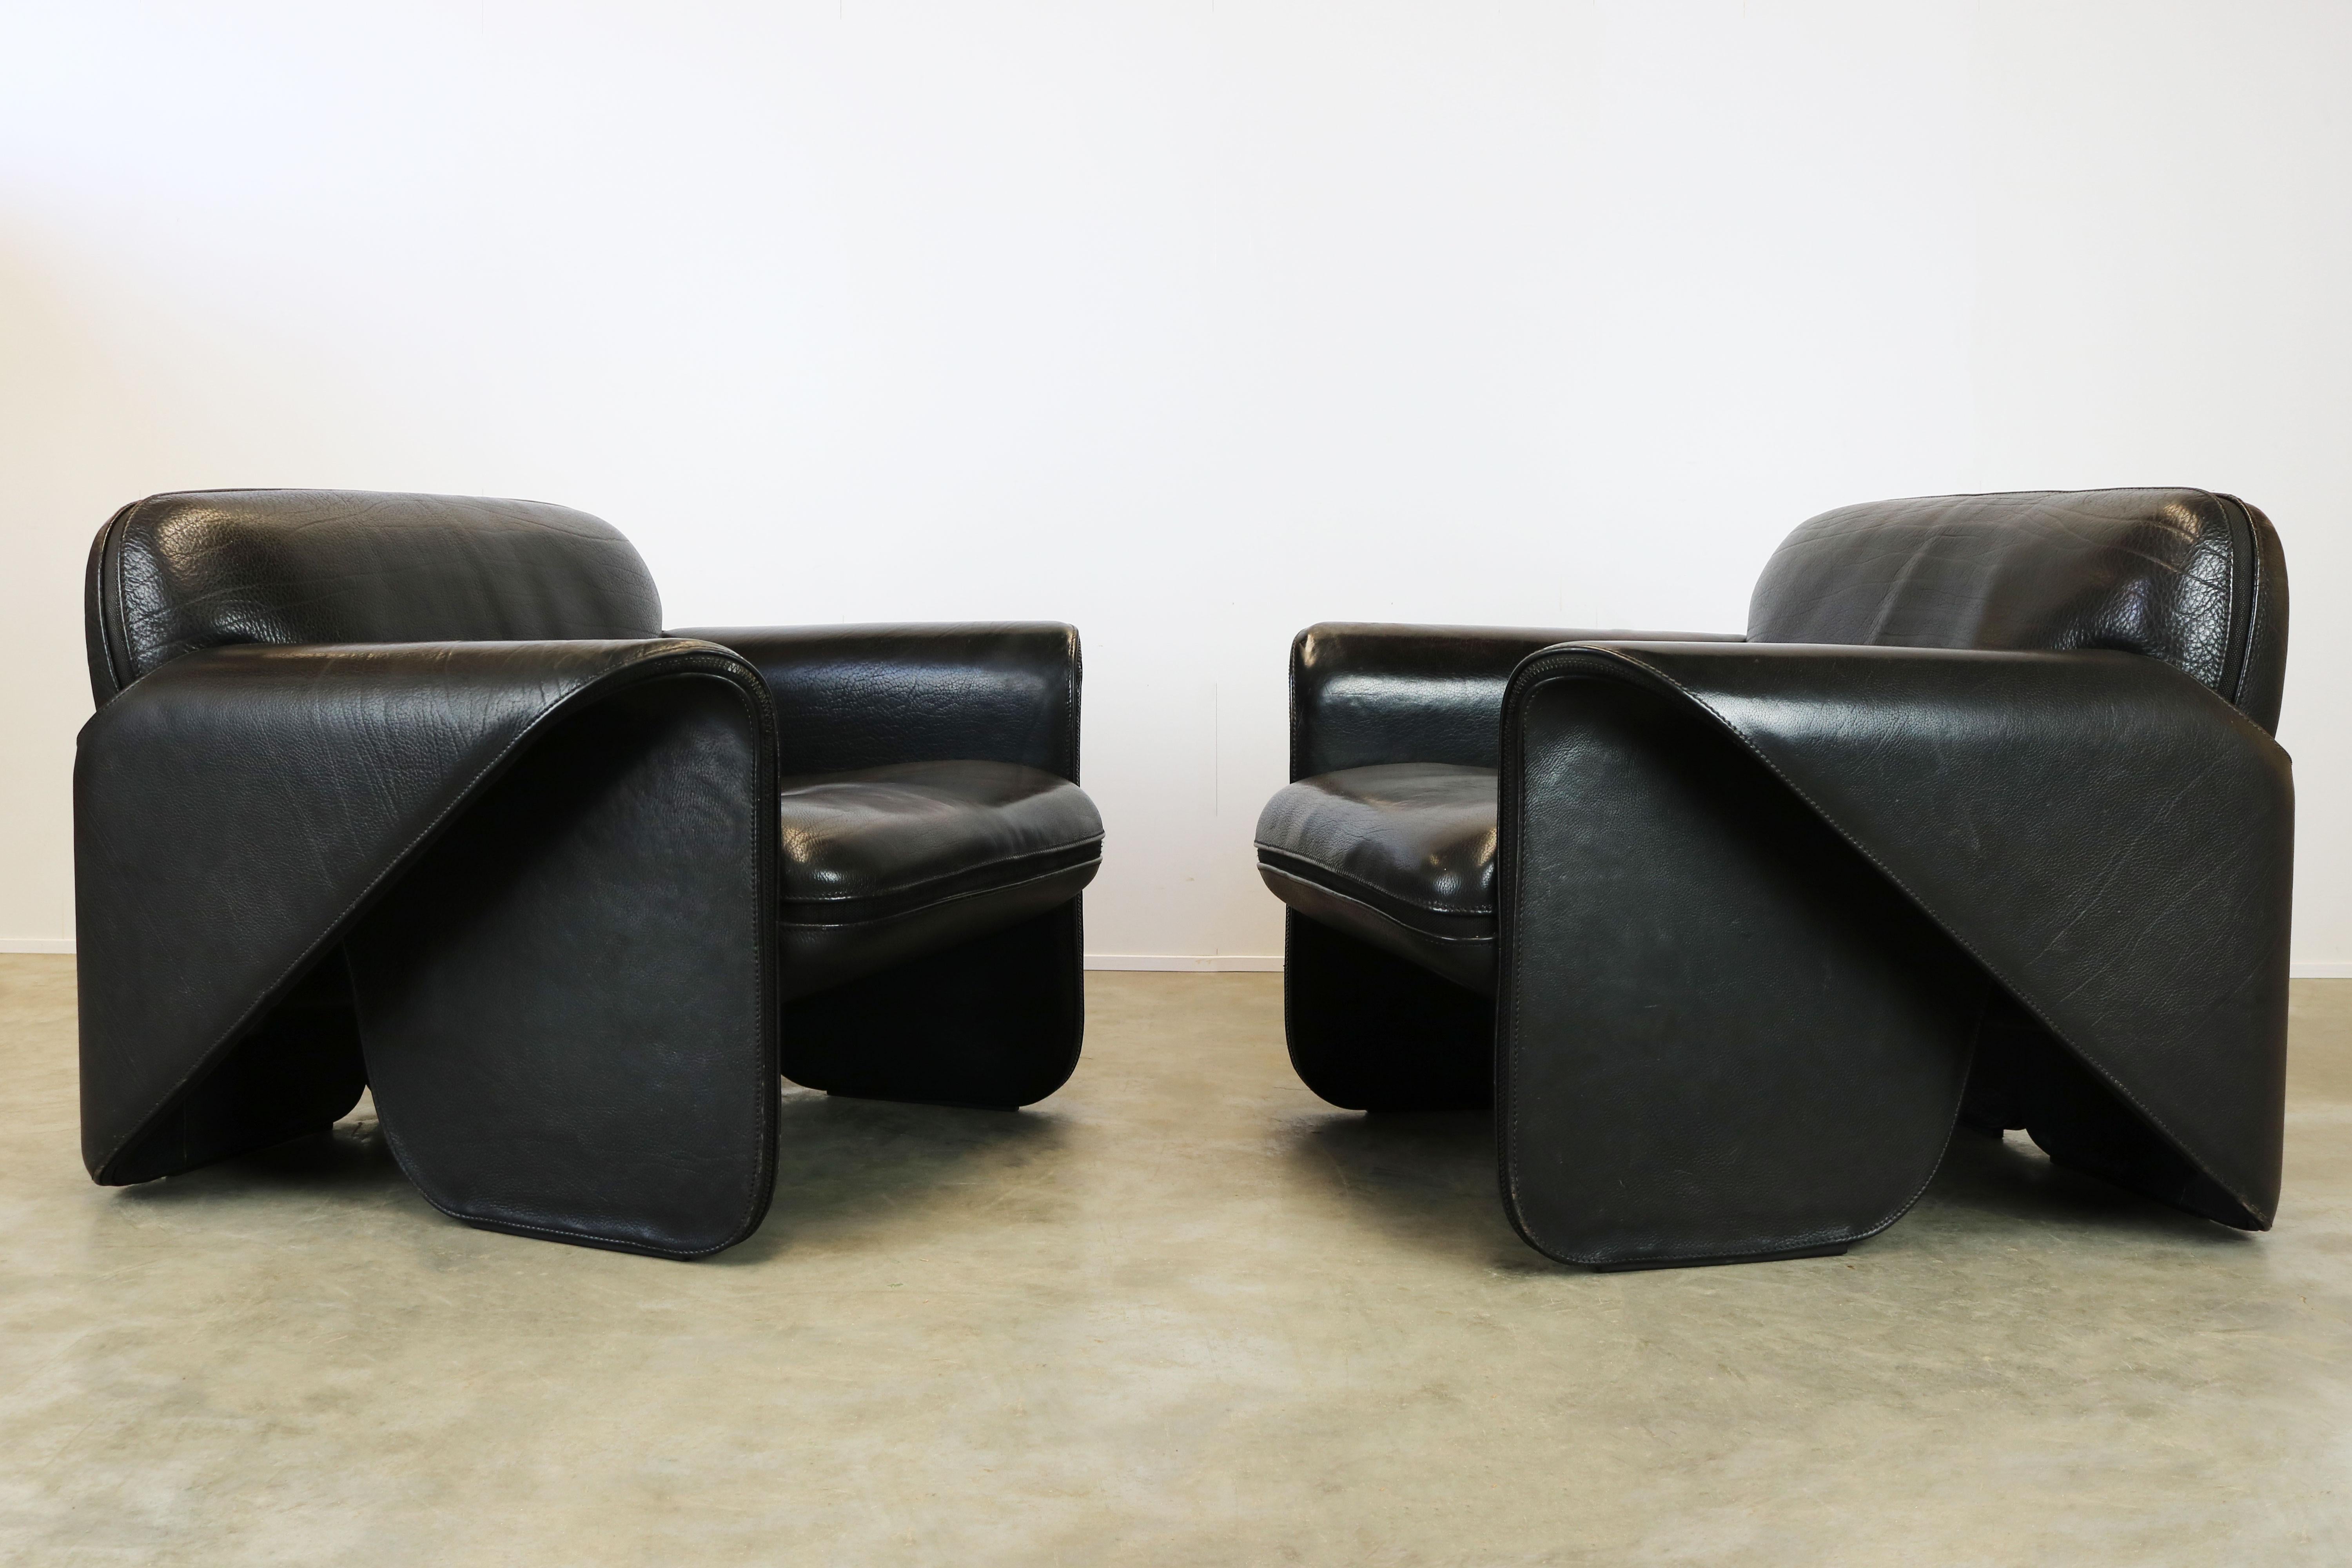 Magnificent & very rare pair of De Sede ''DS 125'' lounge chairs by Gerd Lange for De Sede Switzerland 1978. The lounge chairs are made of the best high quality 3 - 5 mm thick neck leather. The leather is black and has just the right amount of